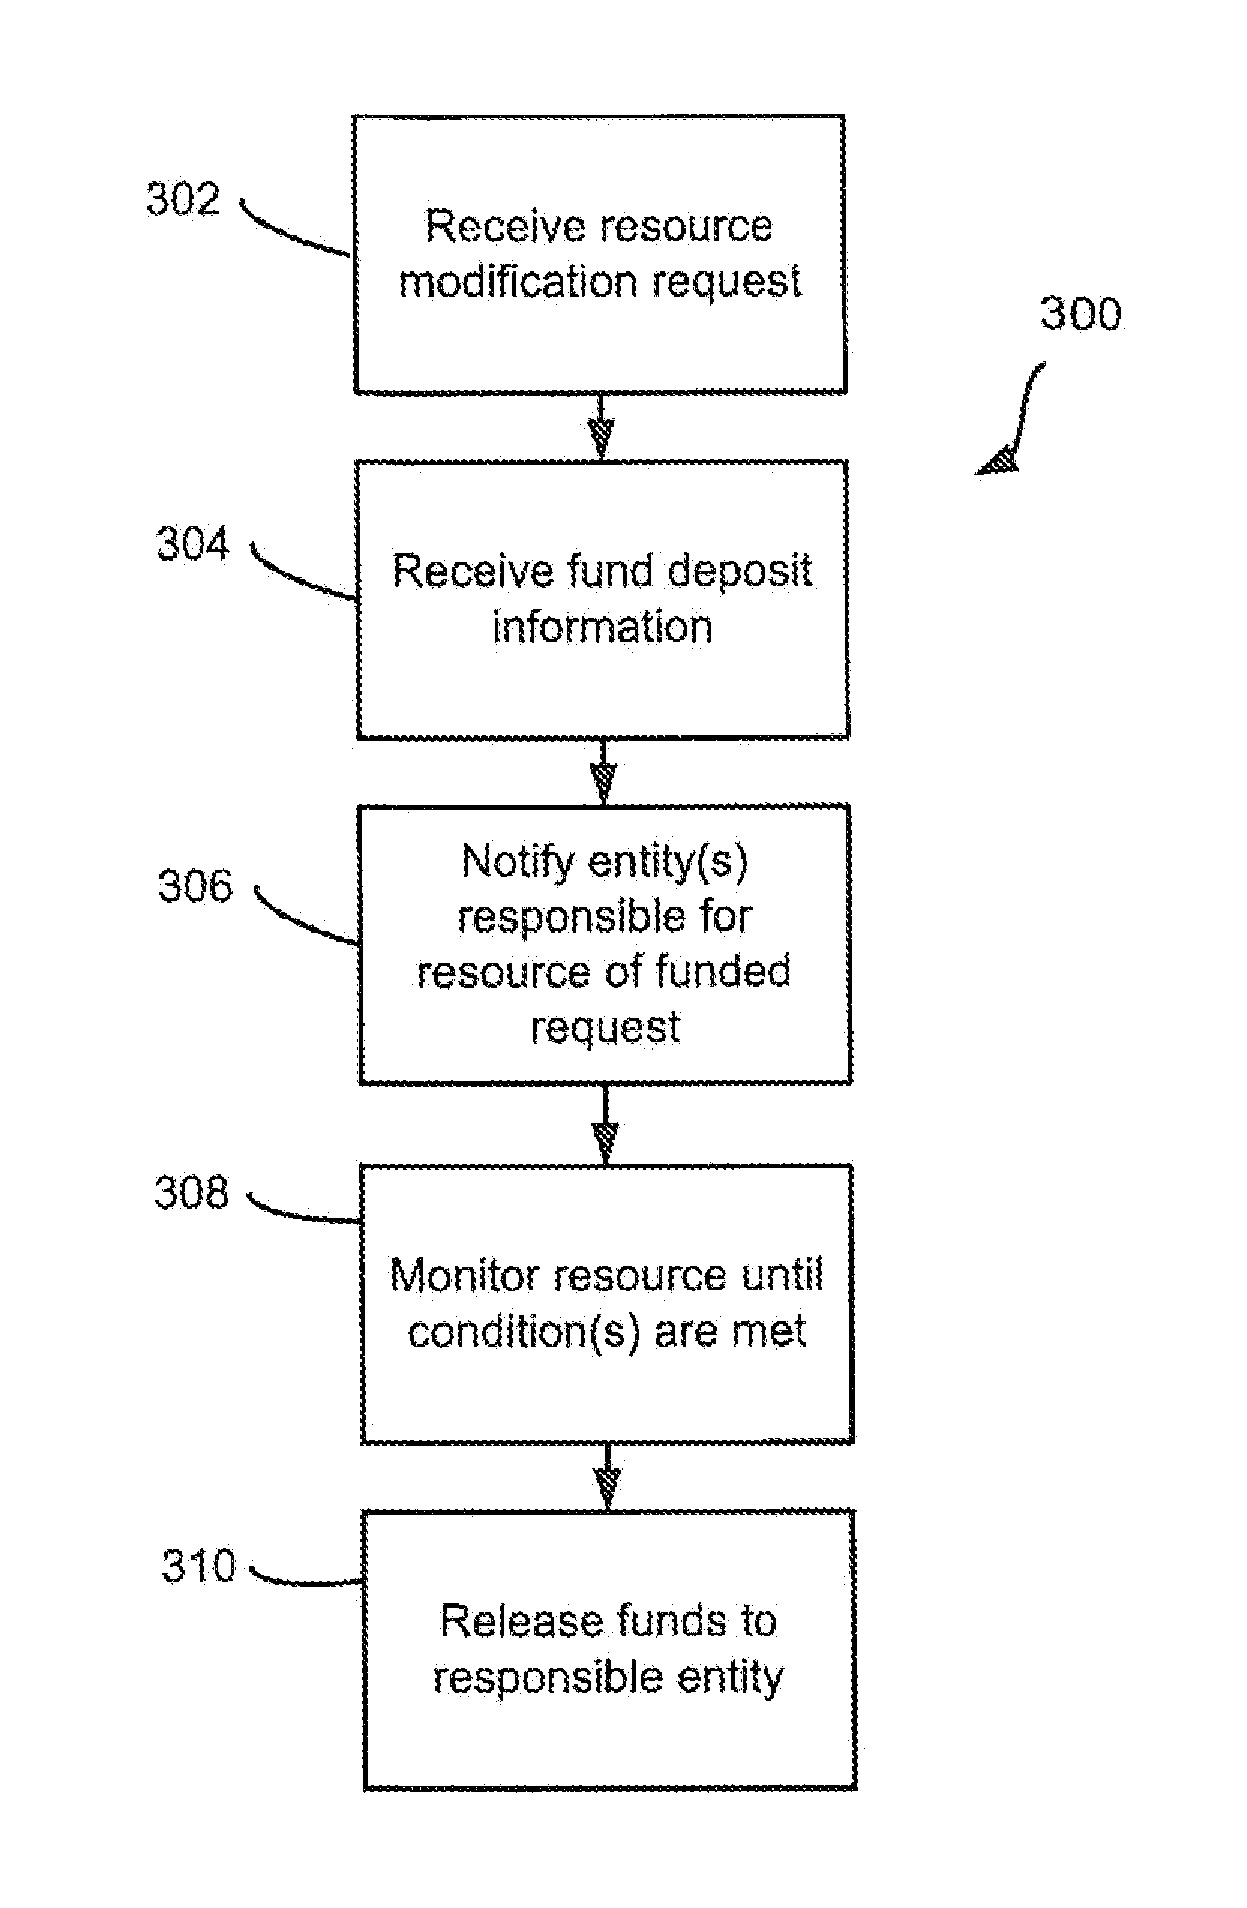 System and method for facilitating exchange of escrowed funds